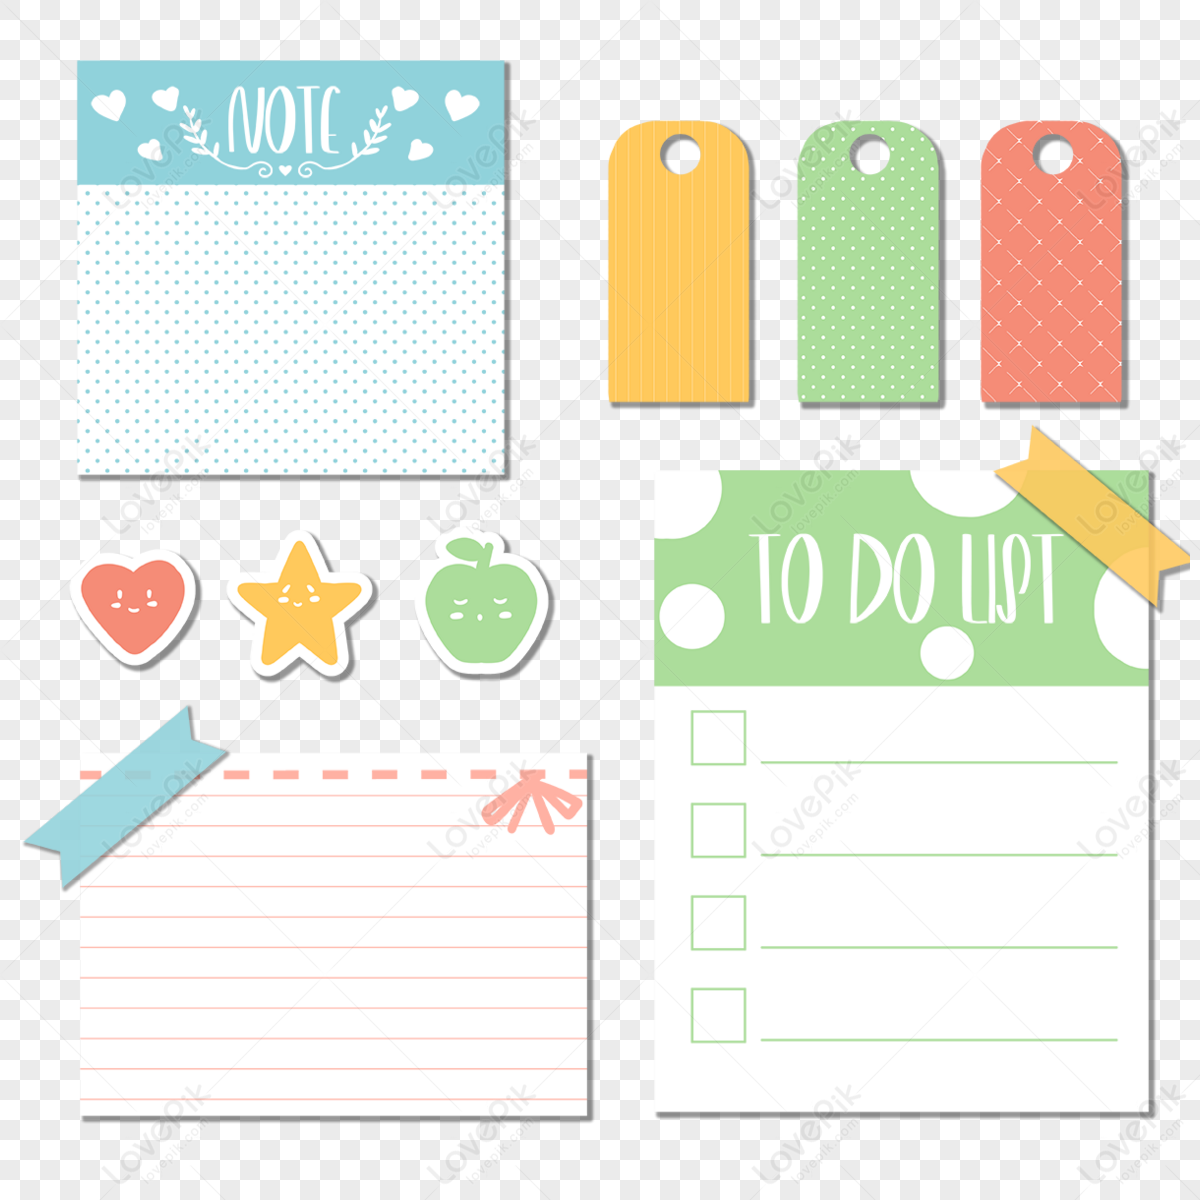 cute color notes,tags,business,cartoon style png hd transparent image